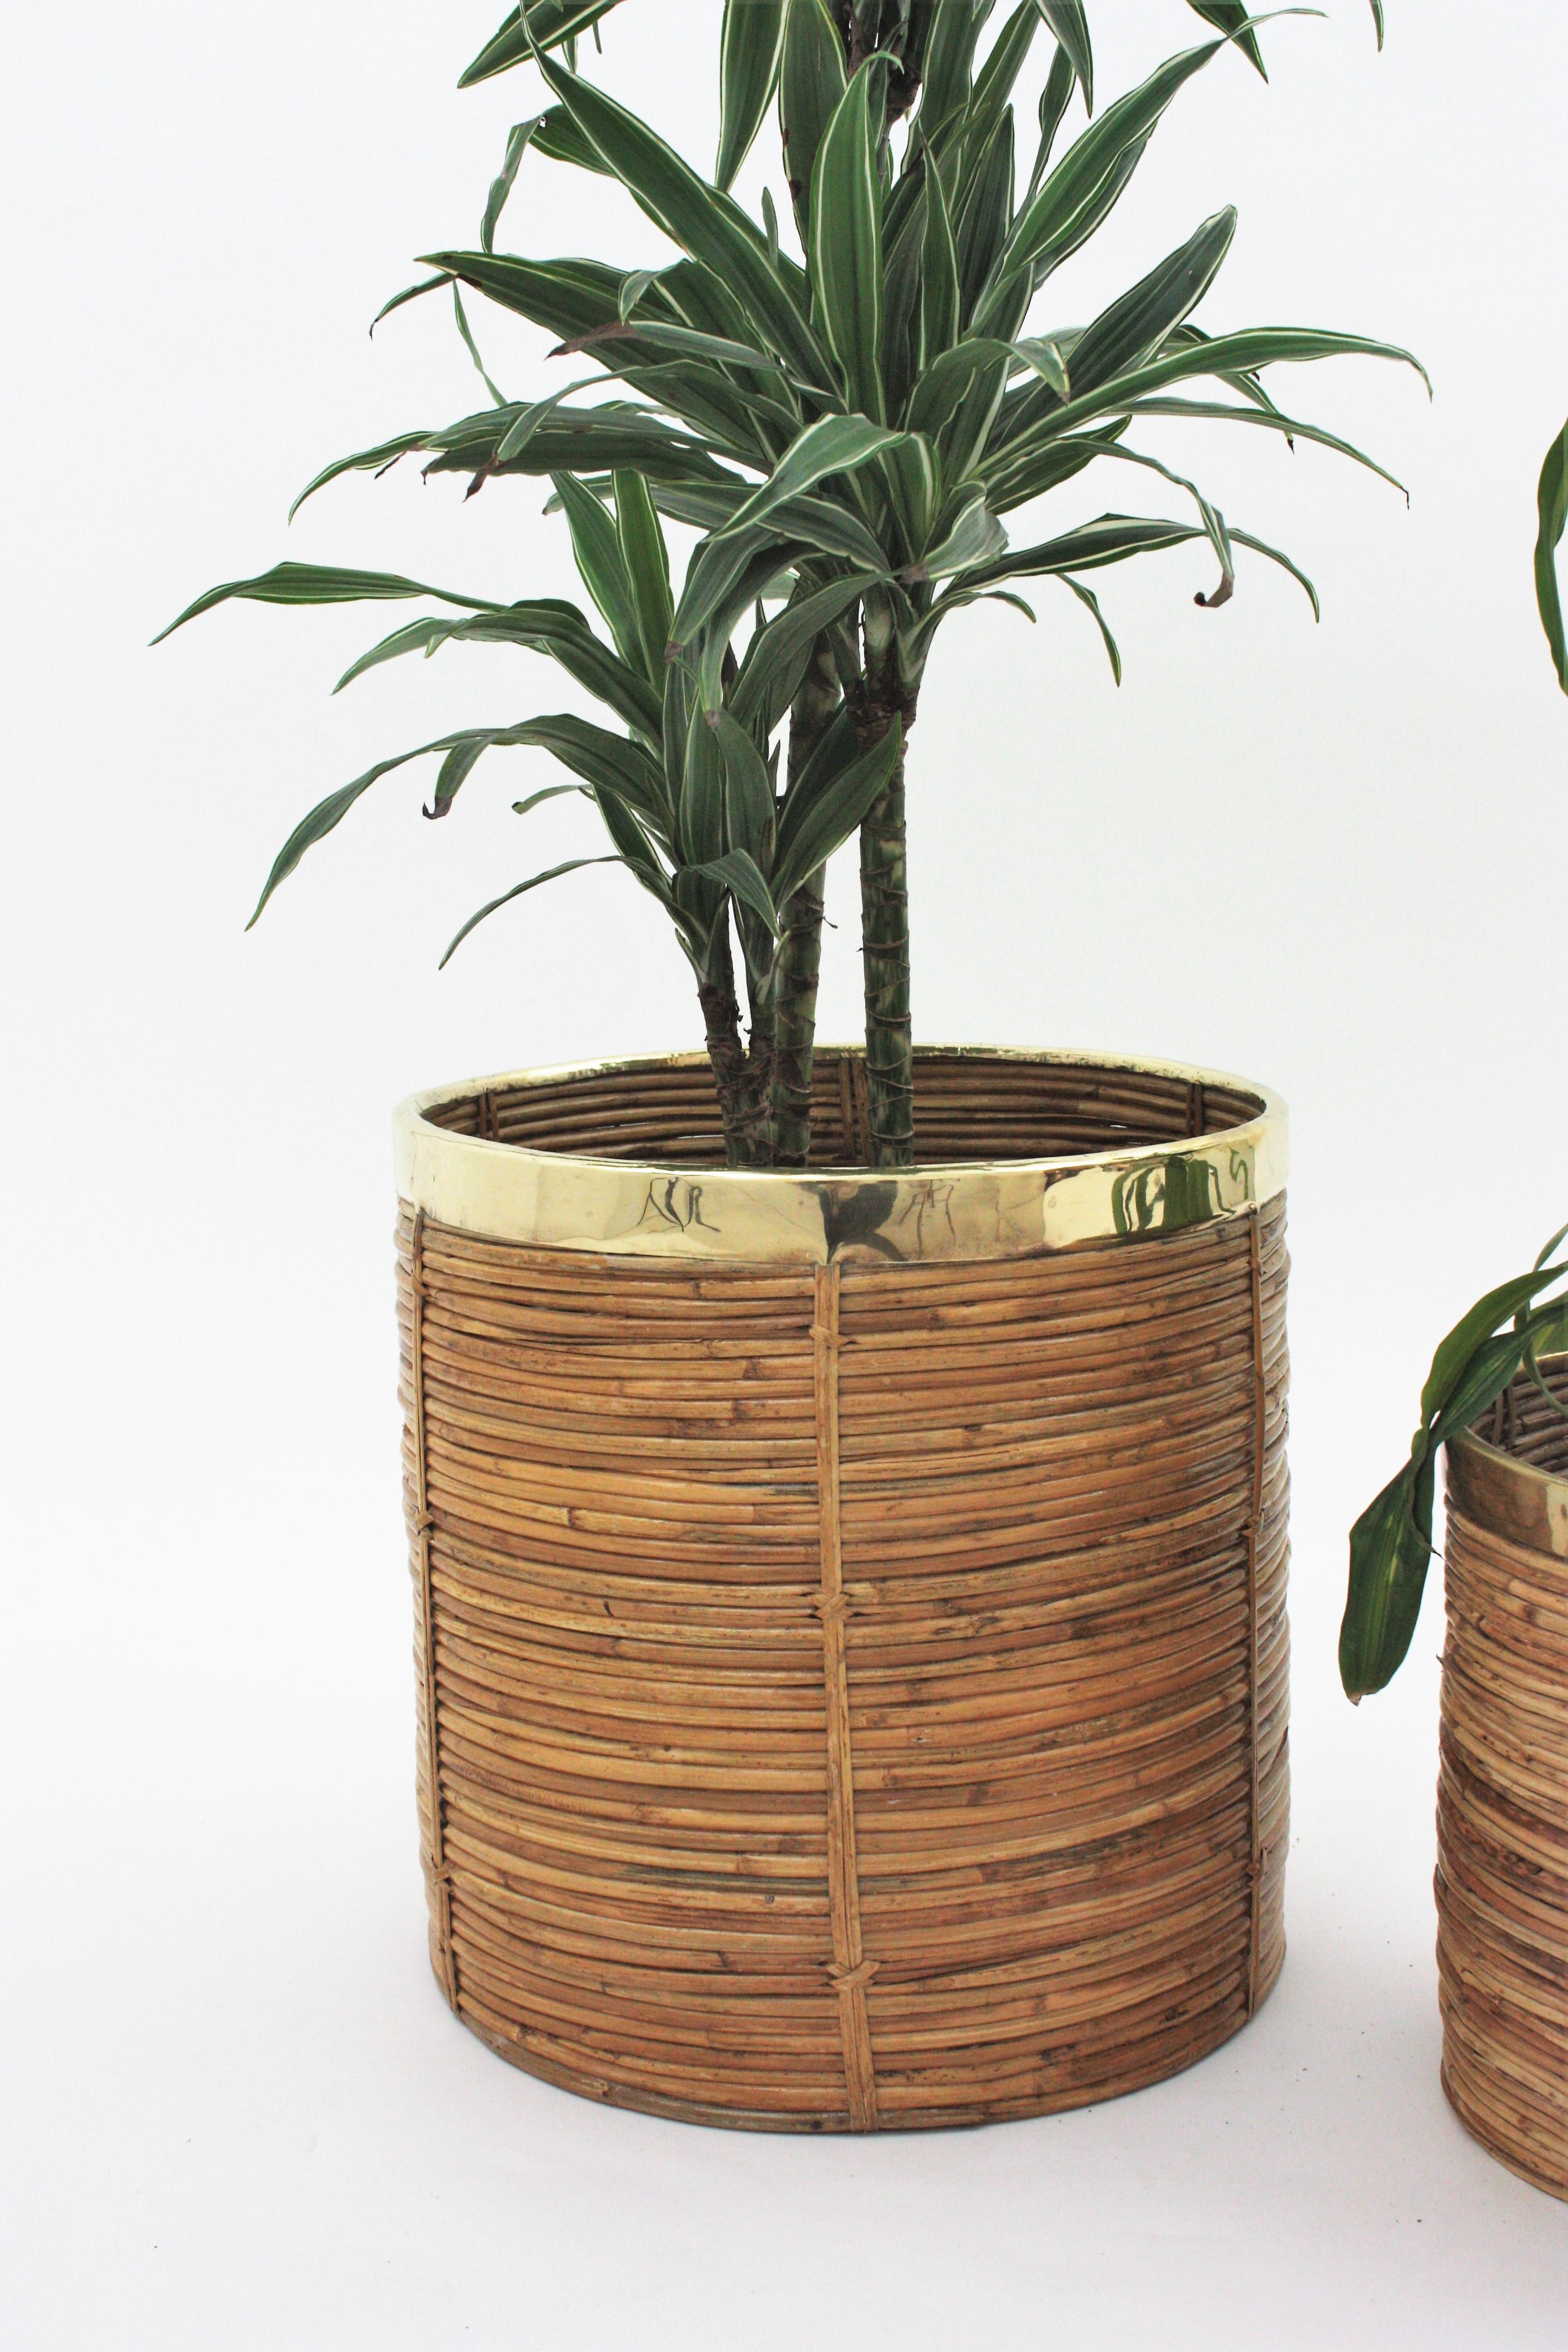 Italian Pair of Mid-Century Brass & Rattan Bamboo Round Planters or Baskets, 1970s For Sale